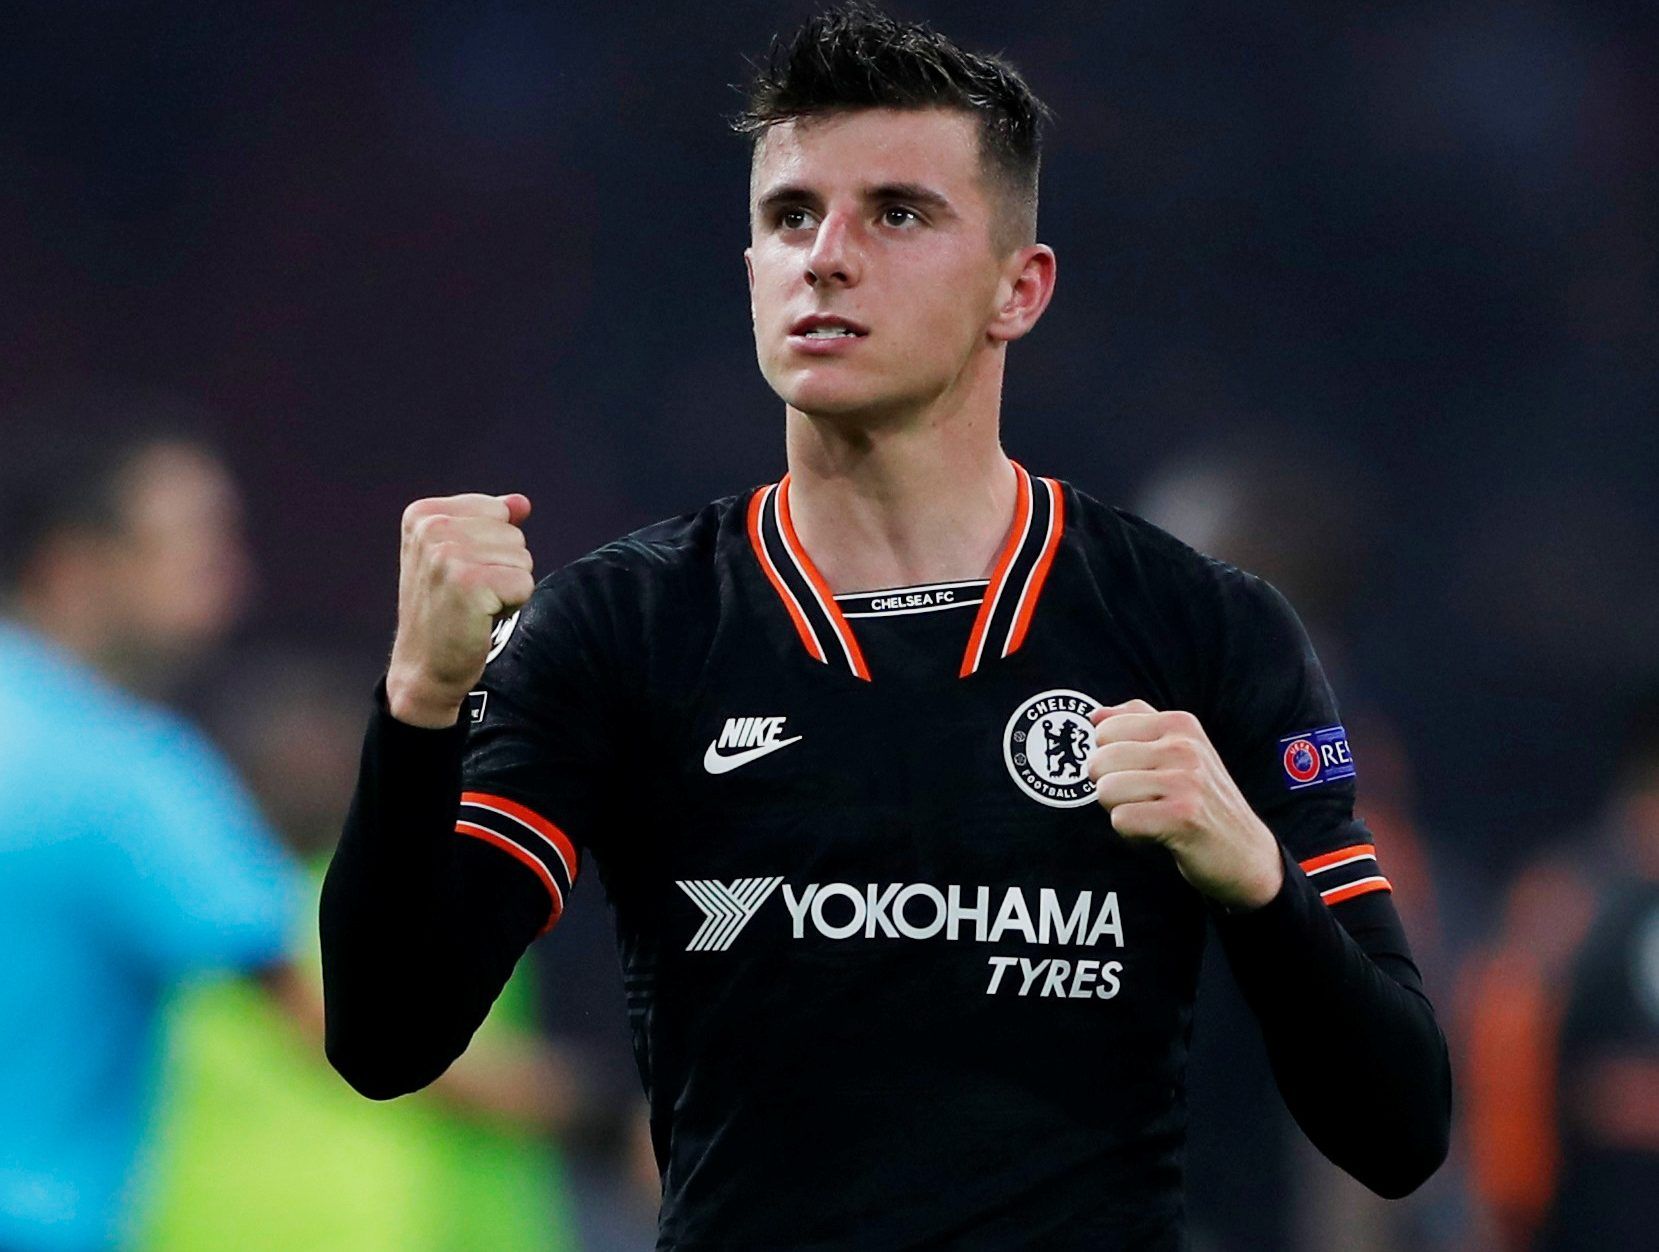 Soccer Football - Champions League - Group H - Ajax Amsterdam v Chelsea - Johan Cruijff Arena, Amsterdam, Netherlands - October 23, 2019     Chelsea's Mason Mount celebrates after the match   Action Images via Reuters/Lee Smith